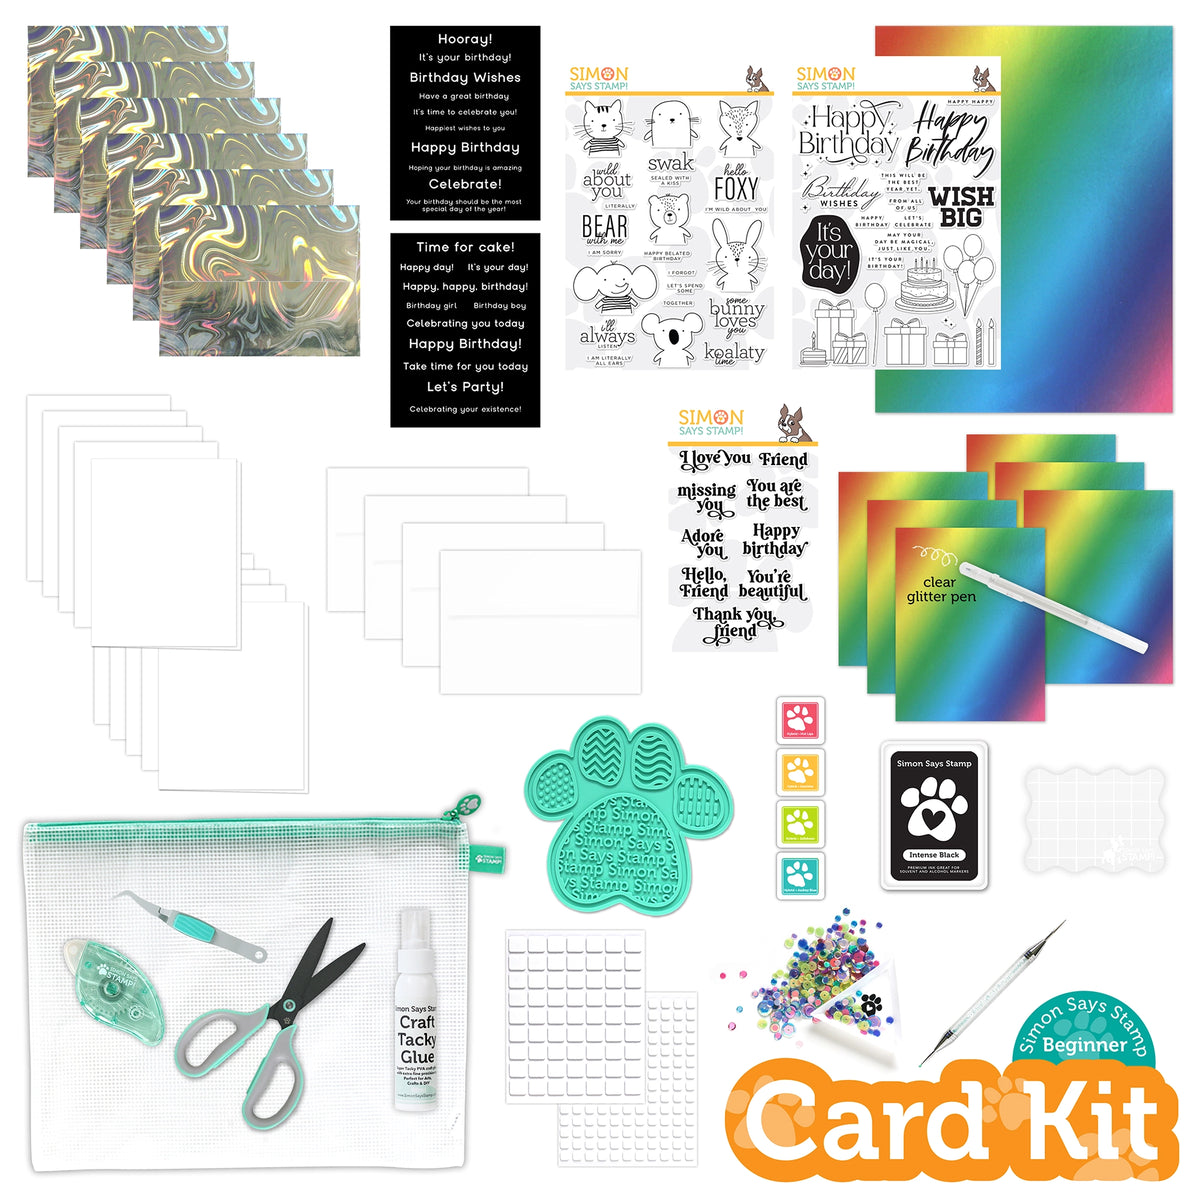 Simon Says Printable Game Kit Graphic by craftedwithbliss · Creative Fabrica